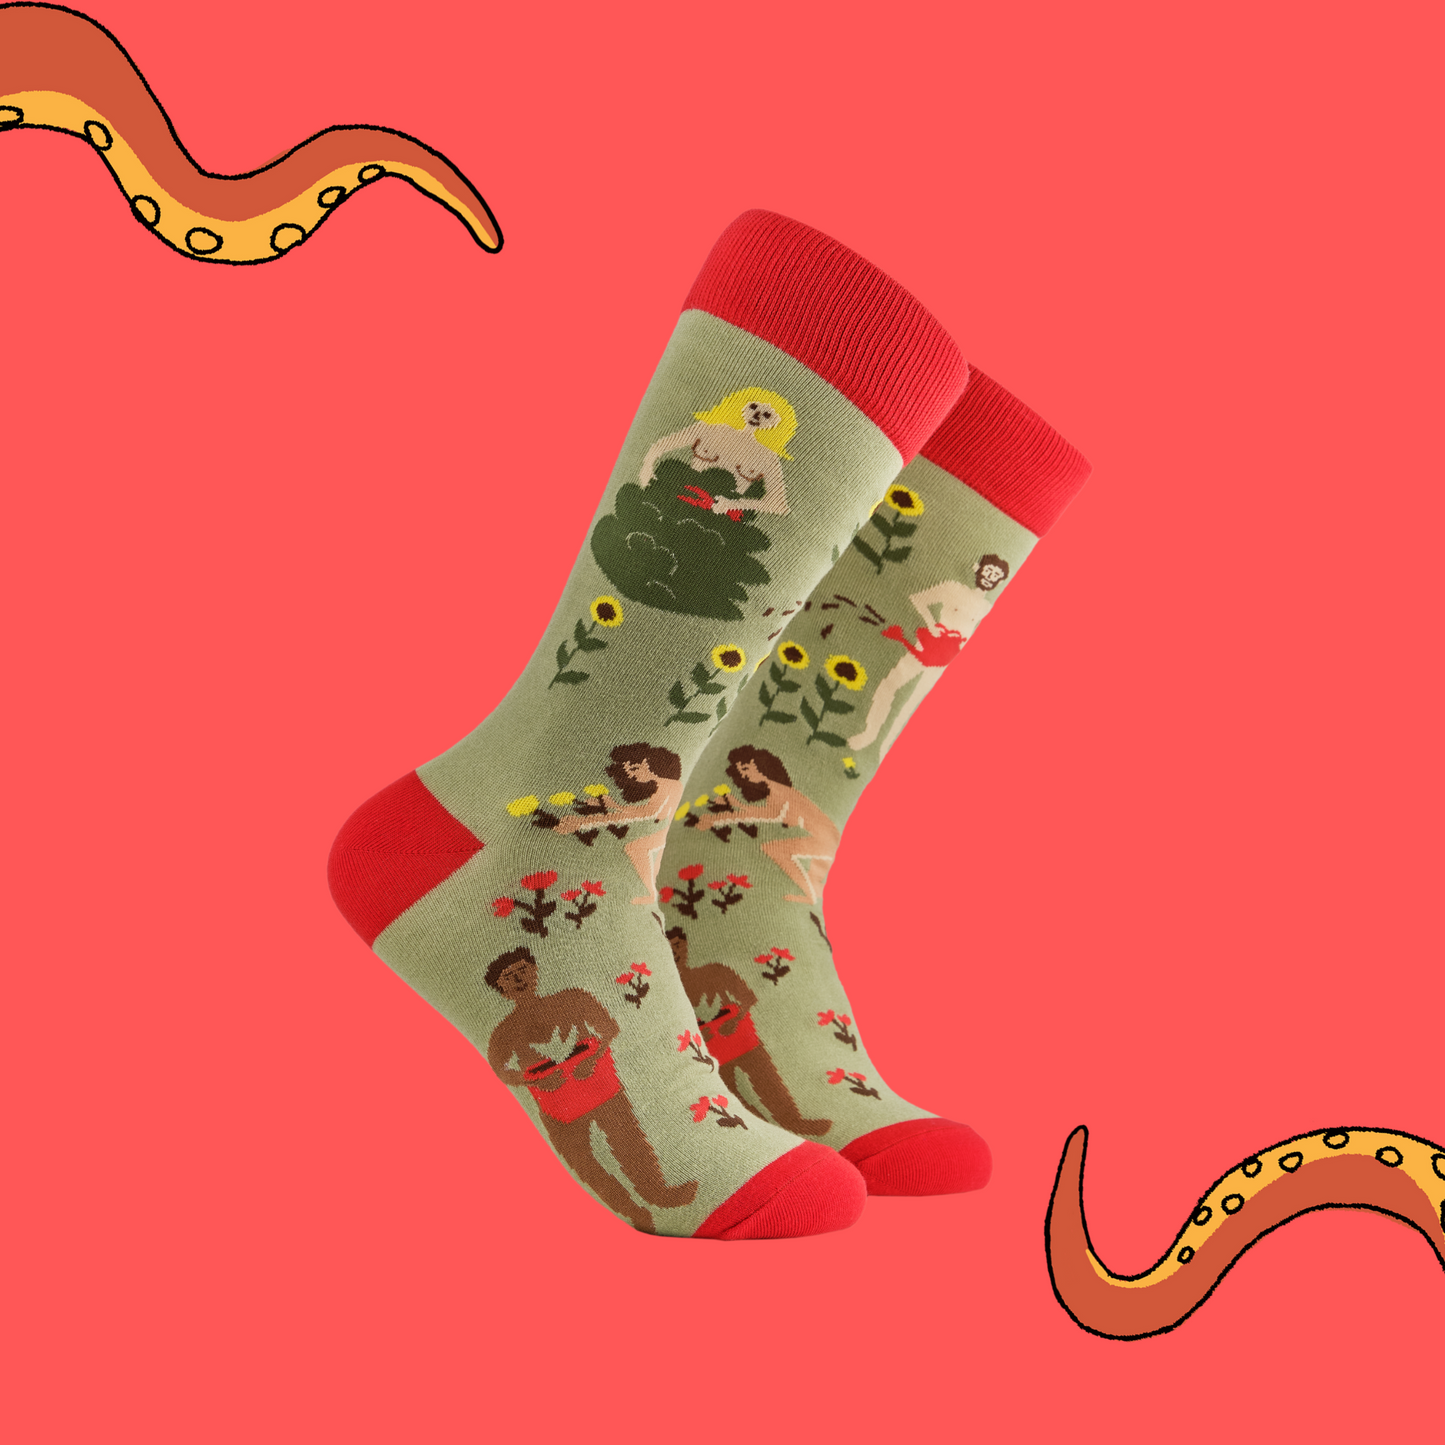 A pair of socks depicting naked gardeners. Green legs, red cuff, heel and toe.